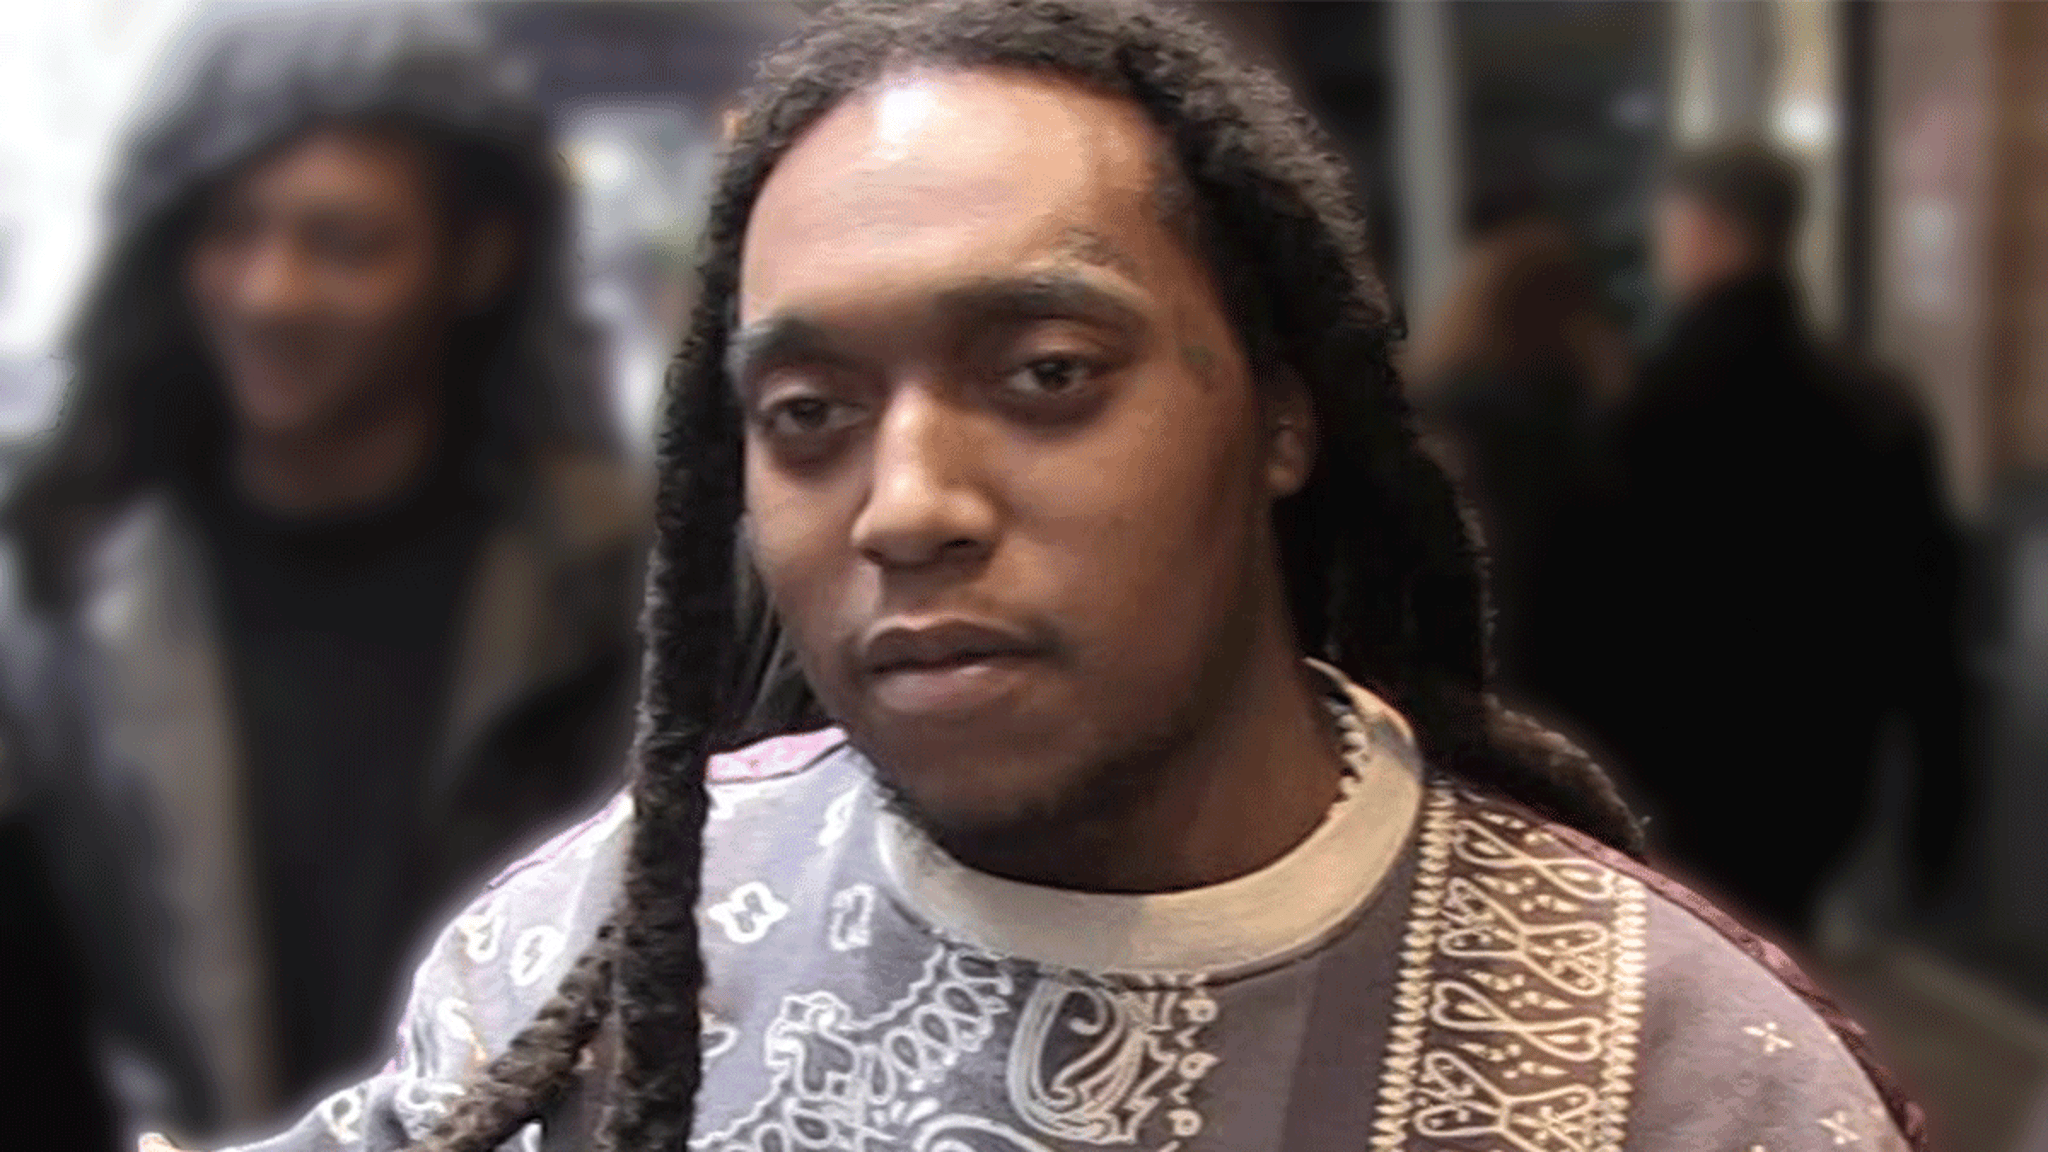 Takeoff's Alleged Murderer Requests Funds to Hire Private Investigator - TMZ